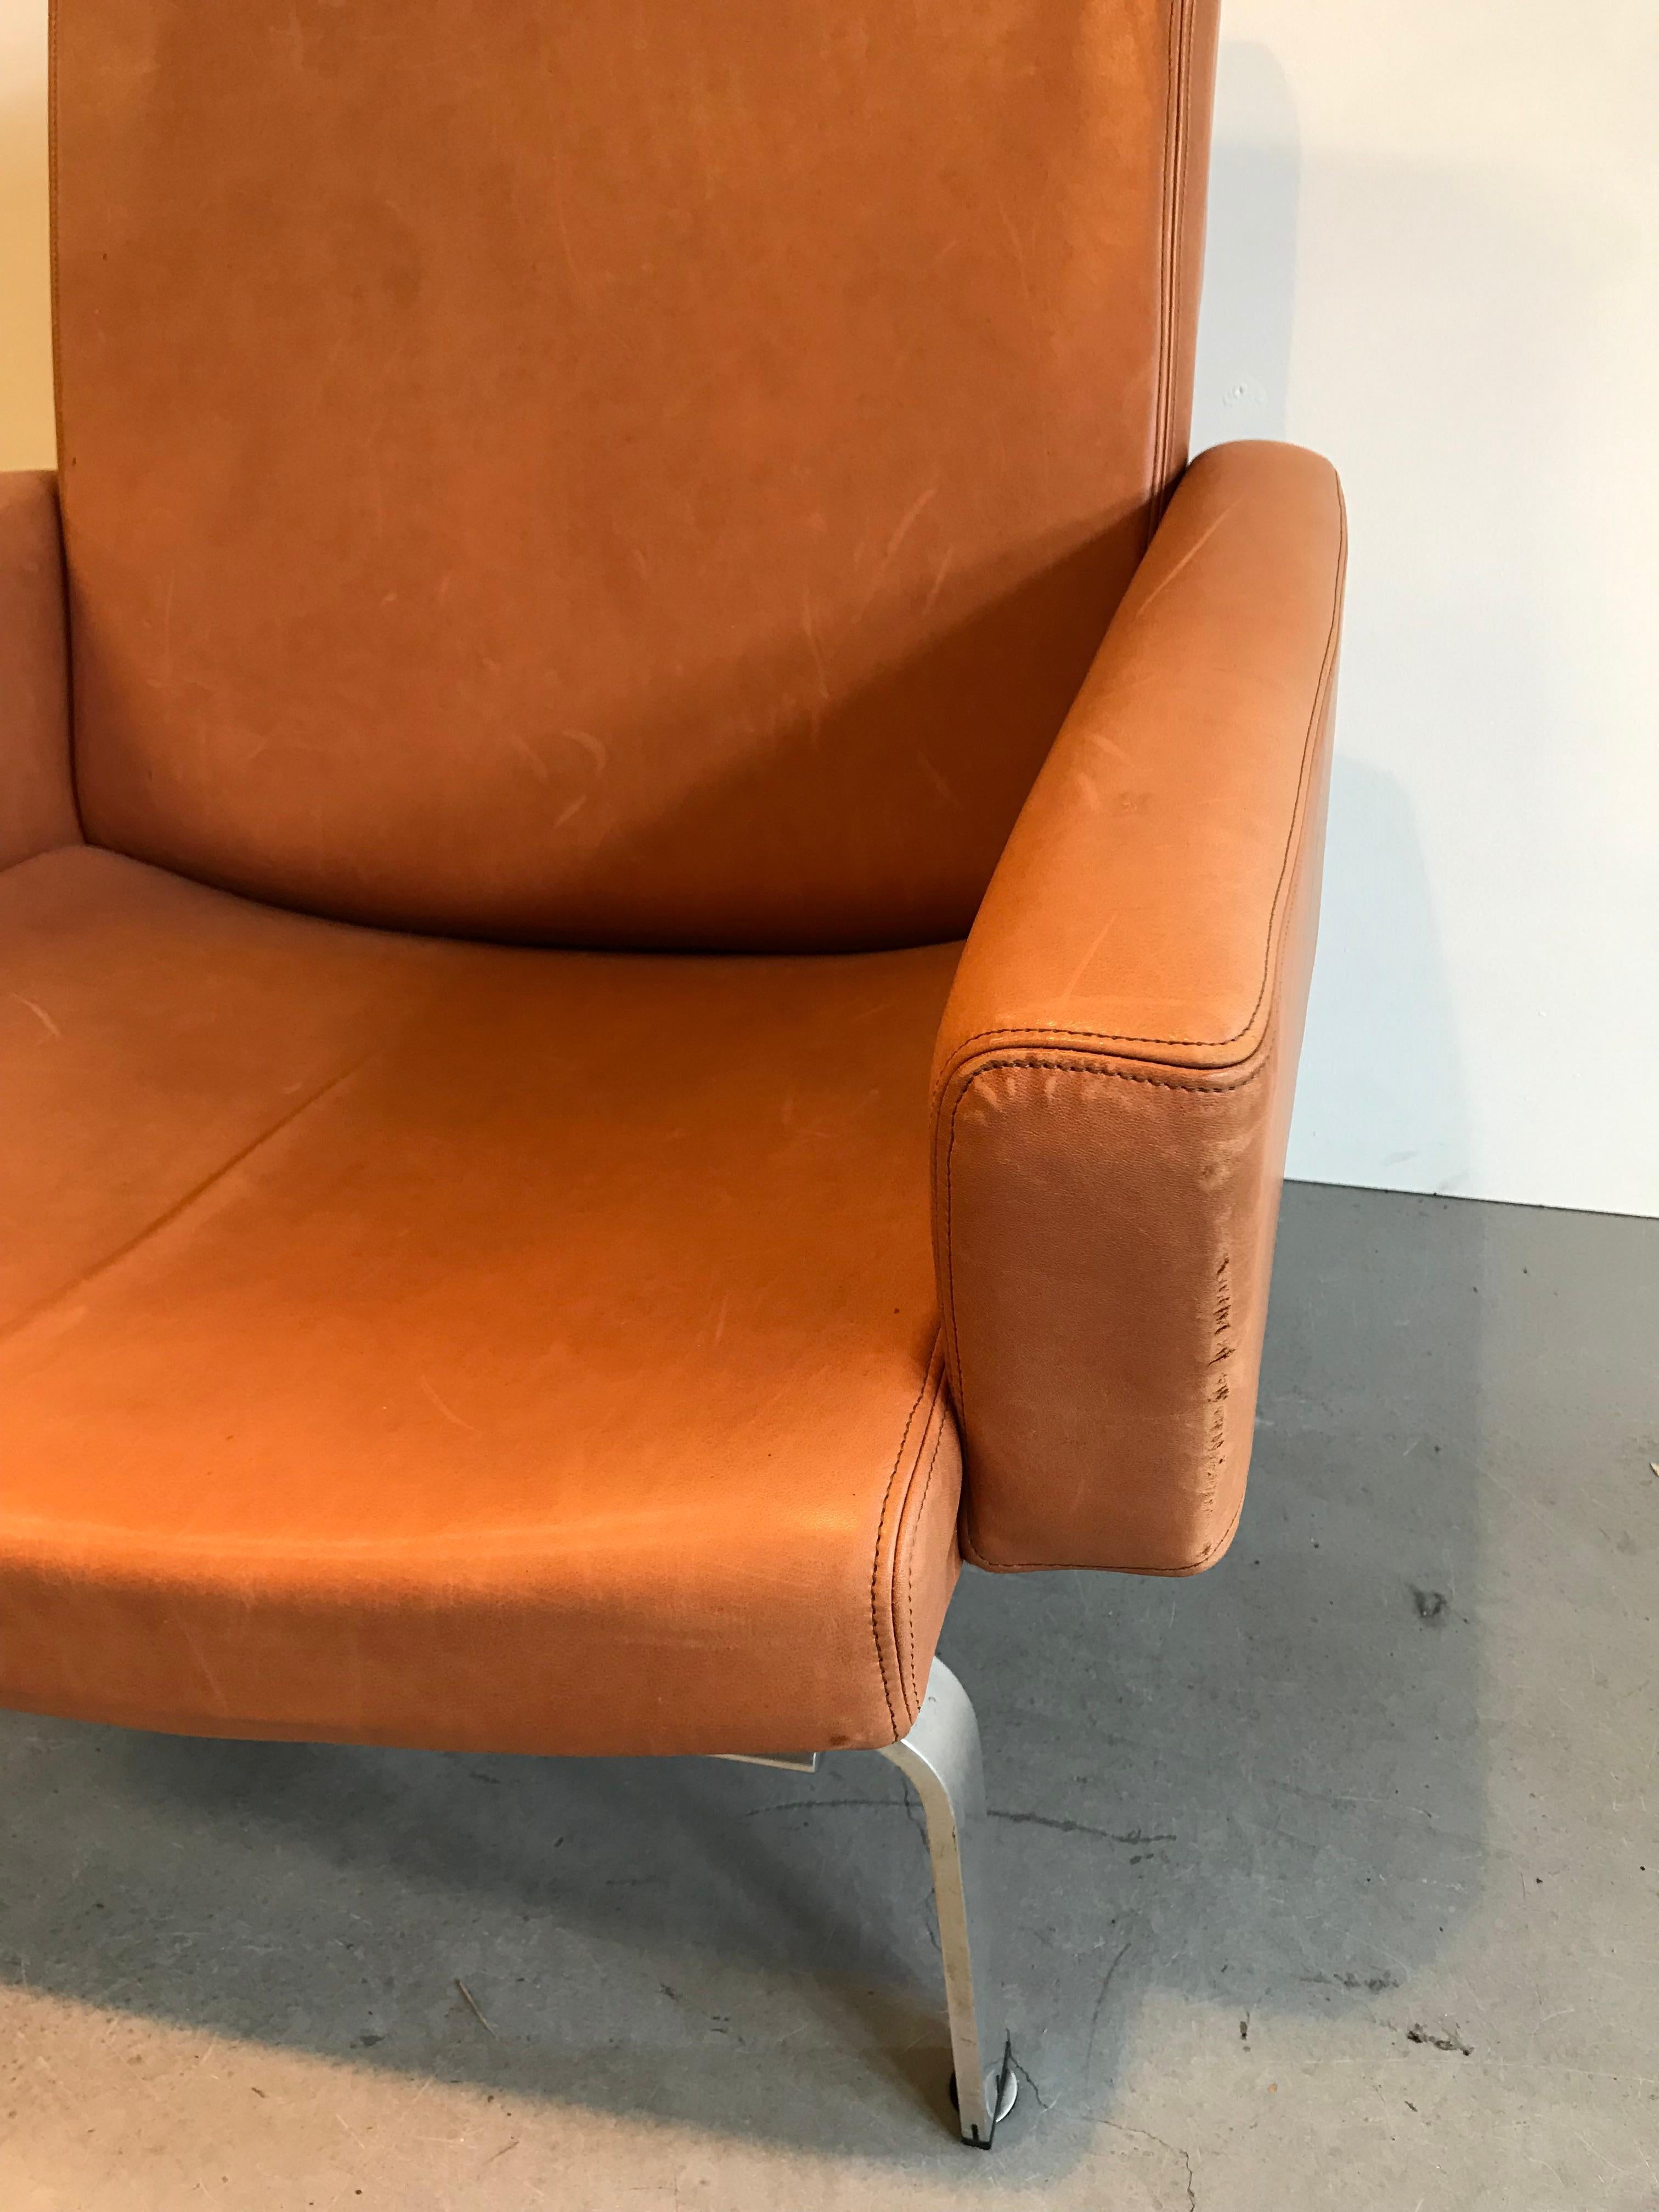 Rare Jorgen Hoj Lounge Chair Vitsoe Design In Good Condition For Sale In Oosterbeek, NL